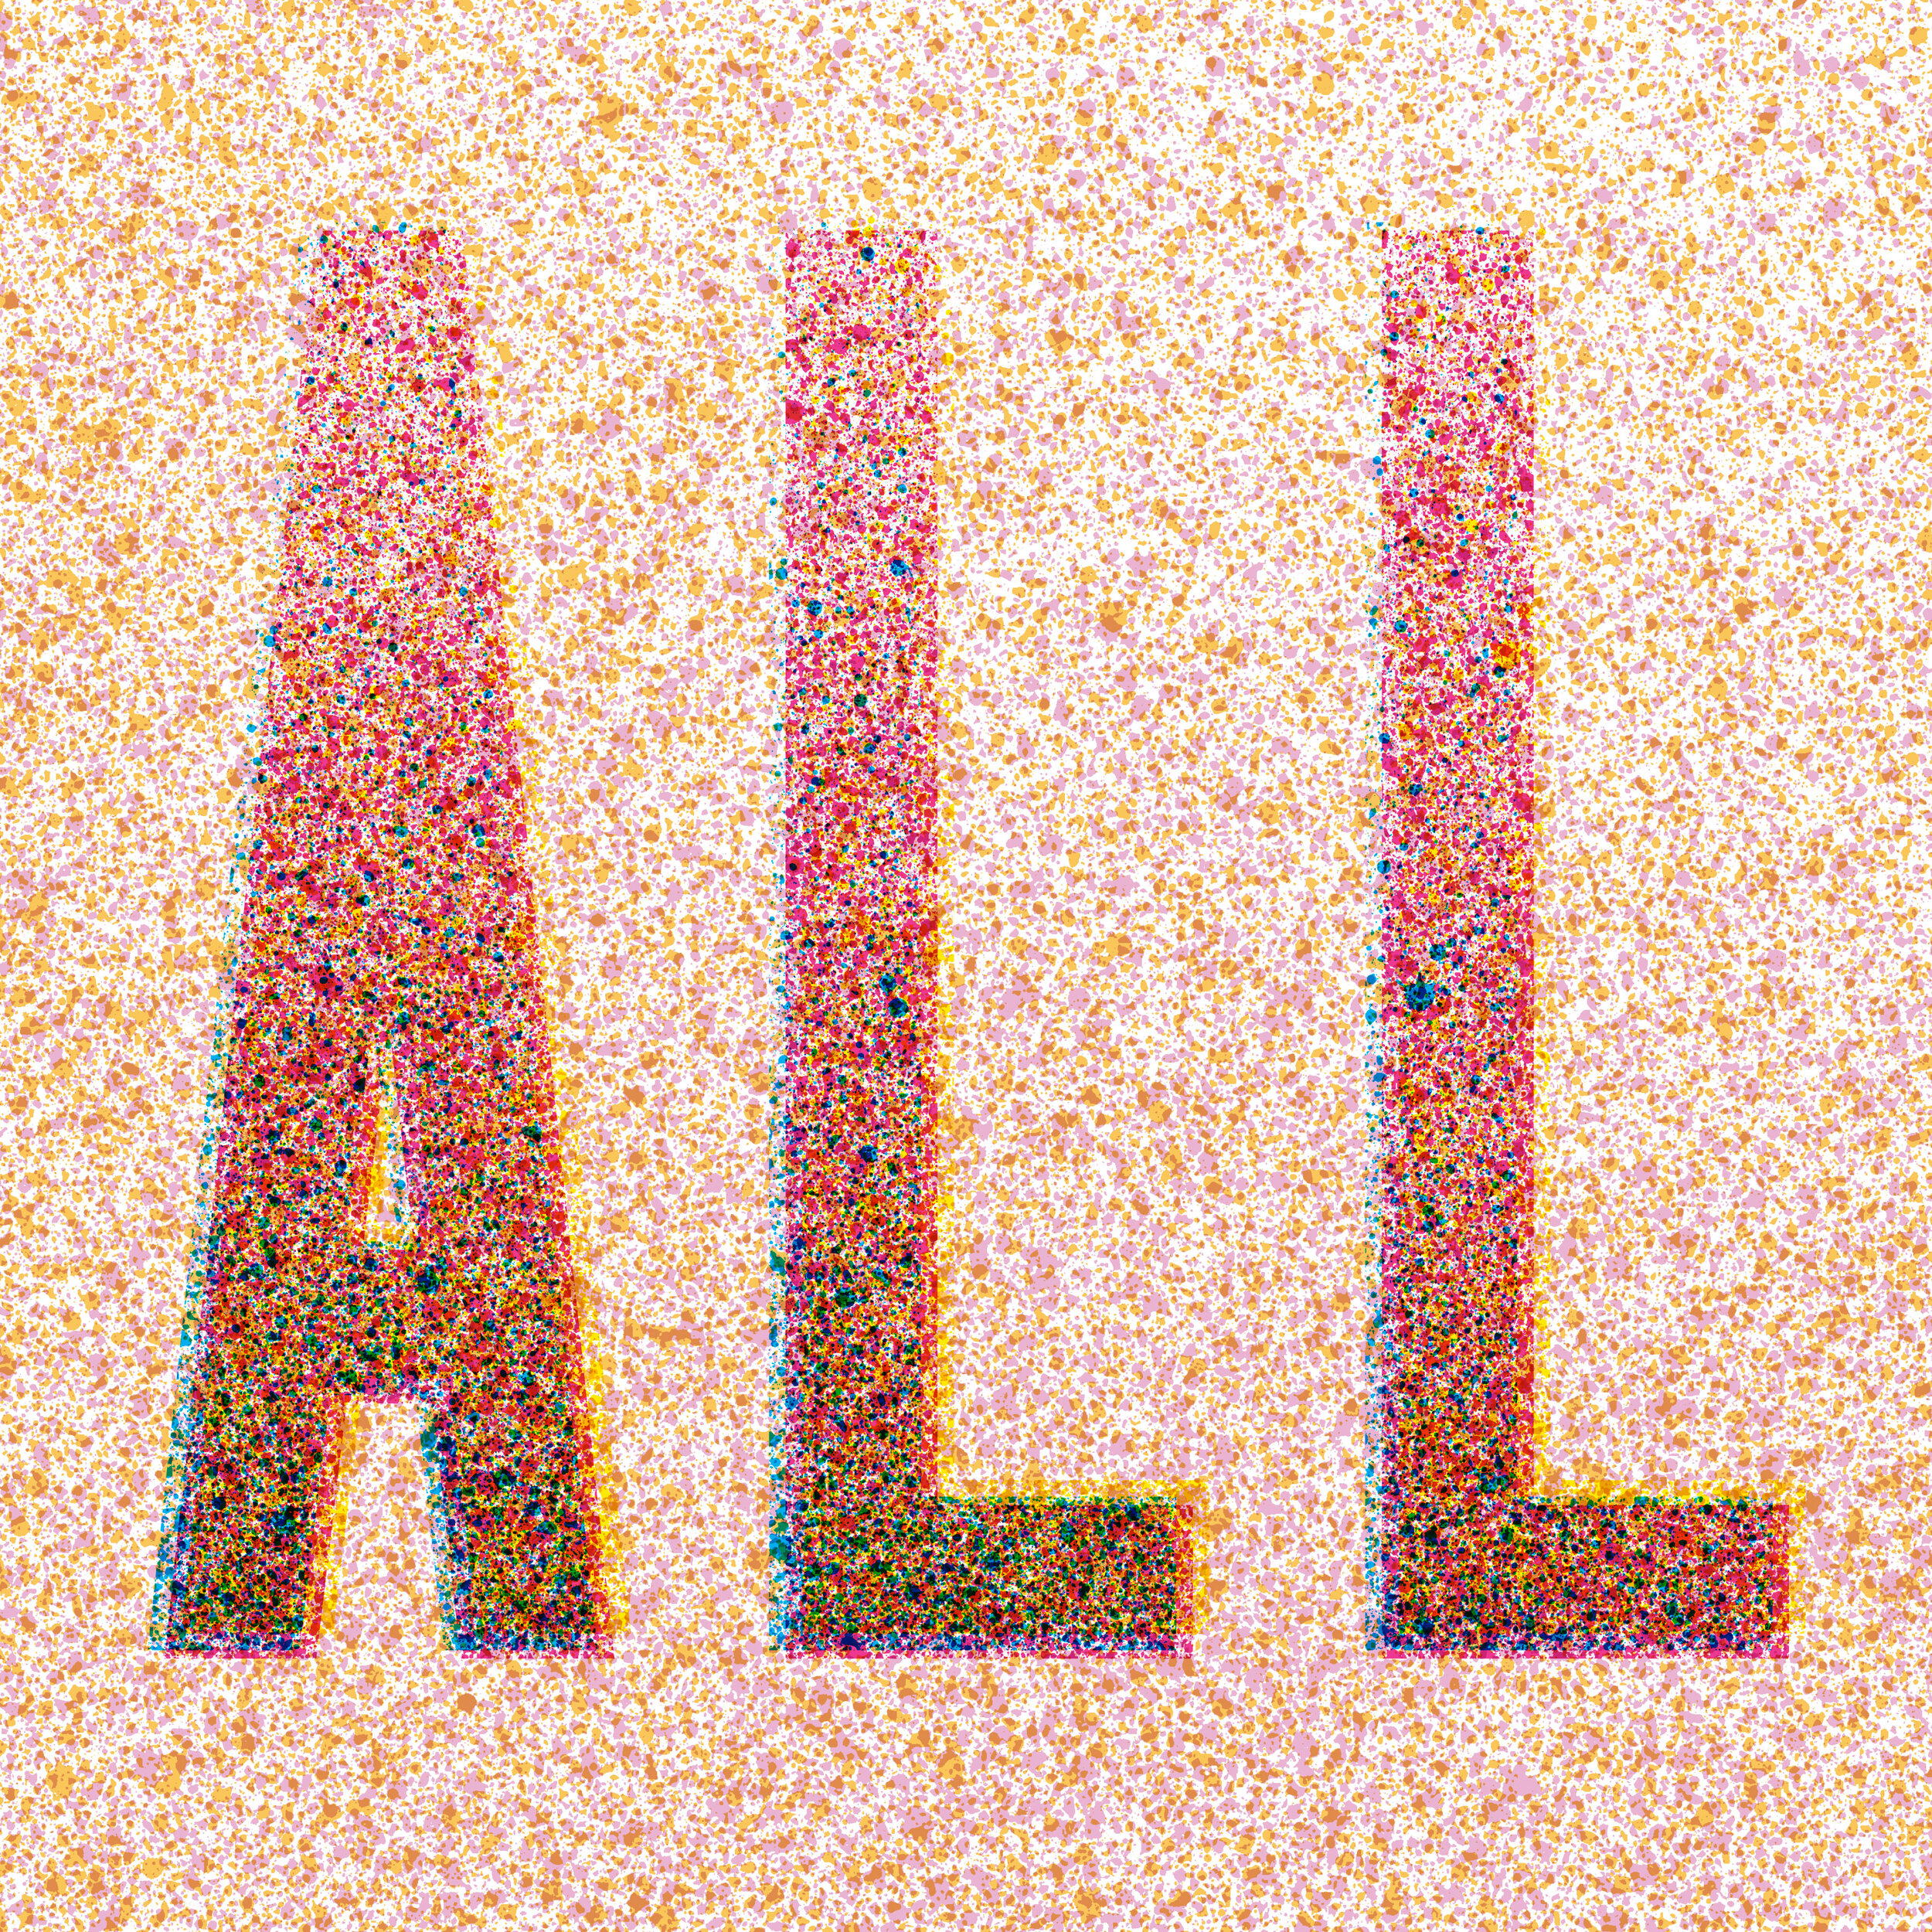 all_together_now_detail-1.jpg